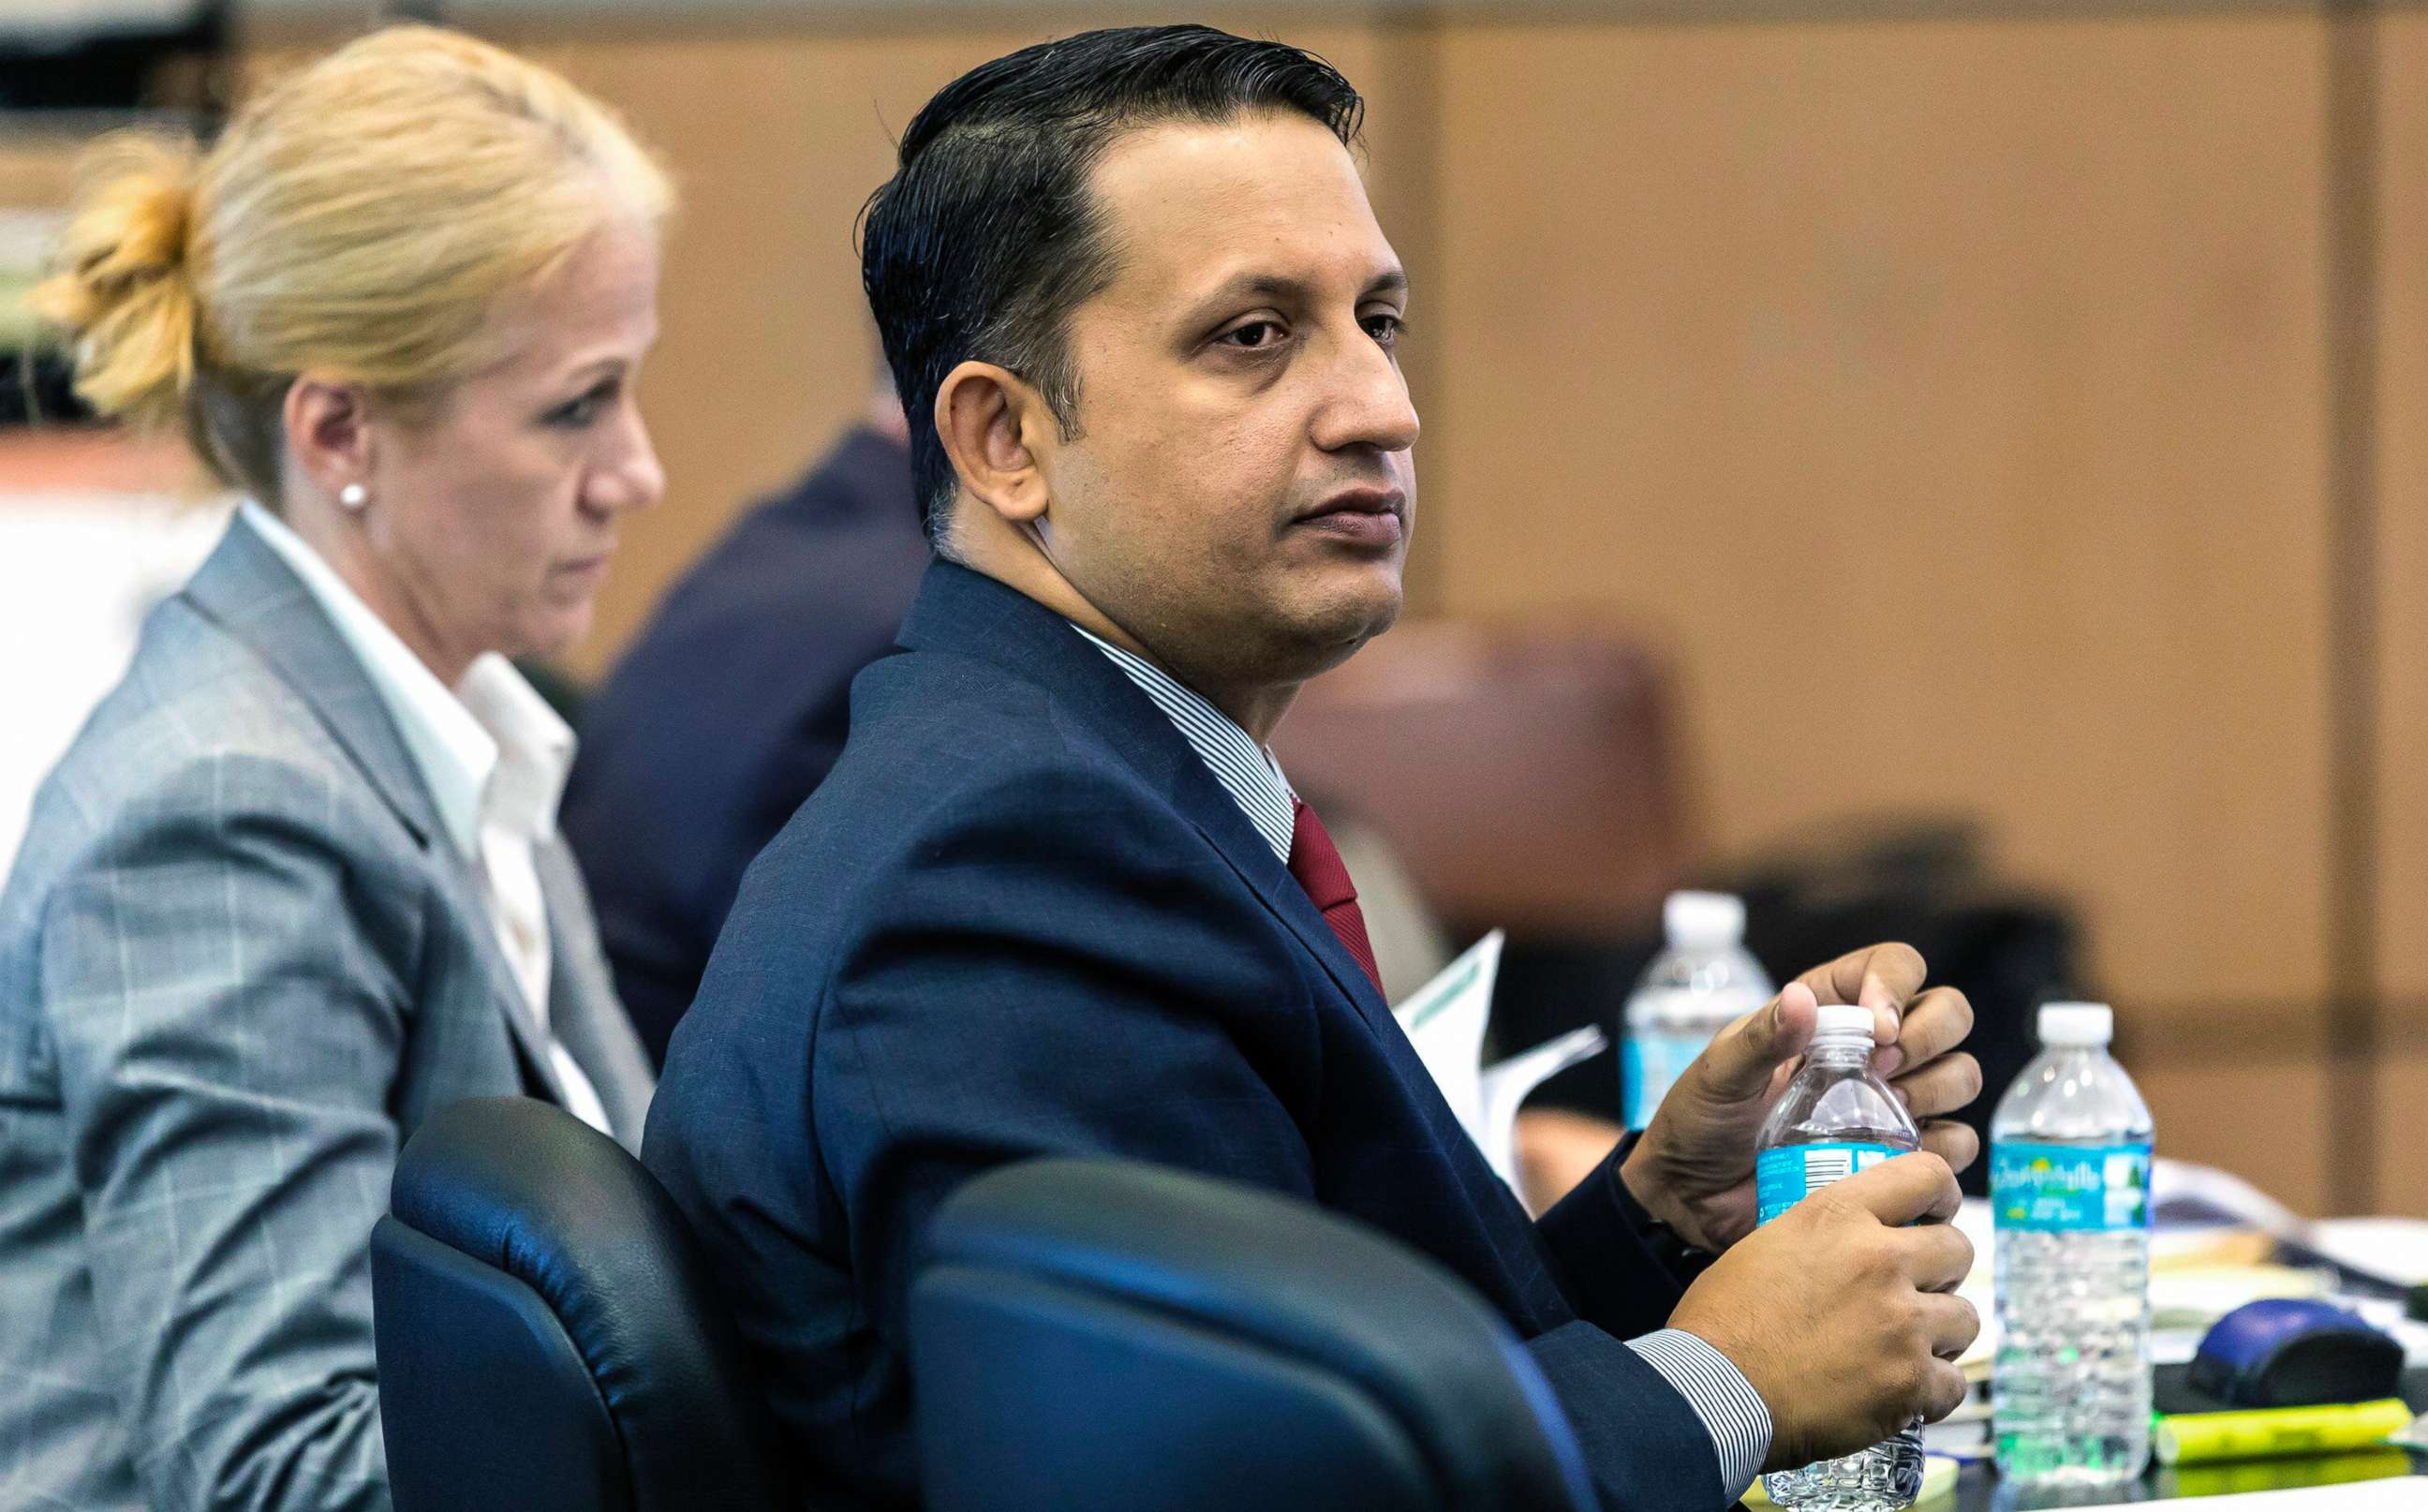 PHOTO: Nouman Raja listens to the testimony of Michael LaForte, a crime reconstruction expert, during his trial, March 5, 2019, in West Palm Beach, Fla.